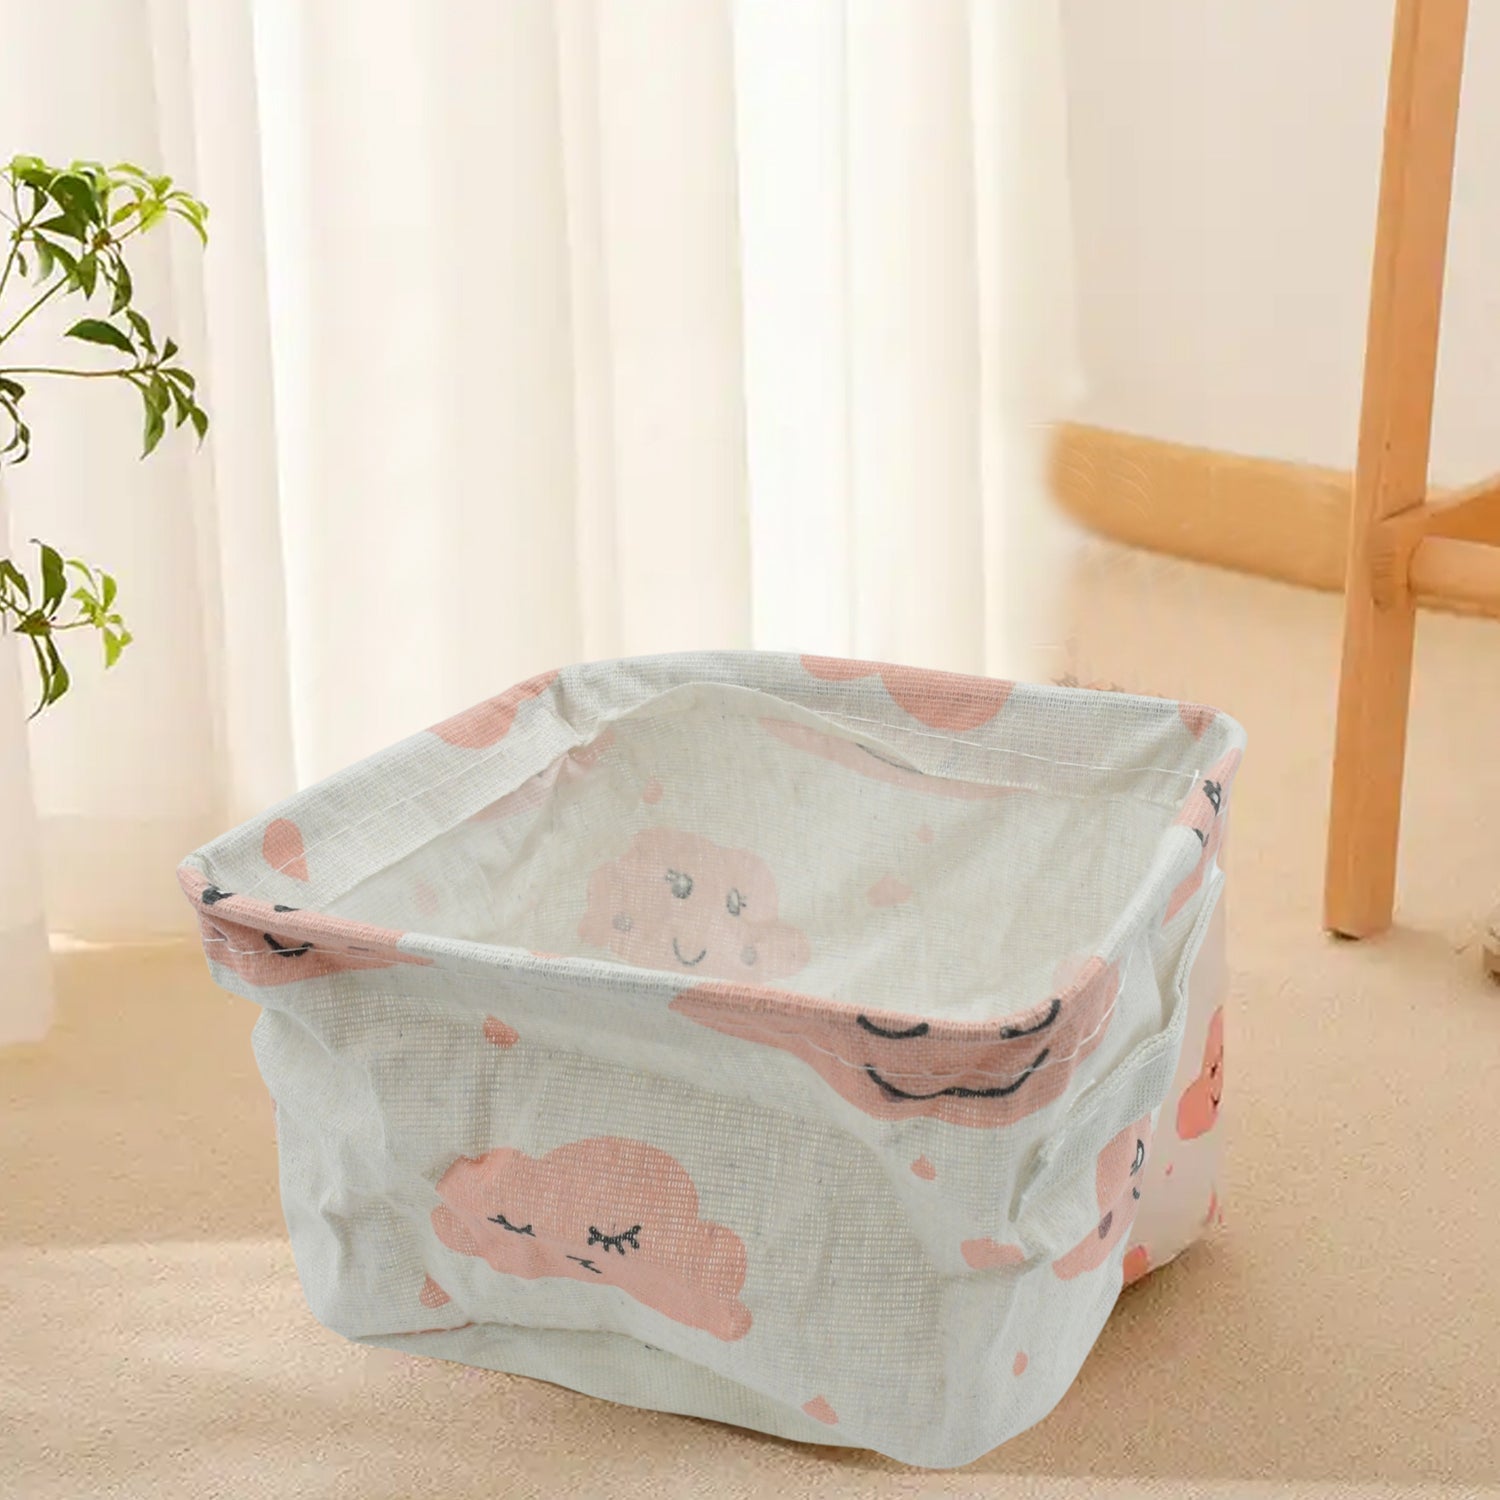 7399 Small Foldable Storage Boxes Cubes Container Organizer Baskets Fabric Drawers Bedroom, Closet, Toys, Thick Cloth Shimmer, Home Decor Organizers Bag for Adult Makeup, Baby Toys liners, Books